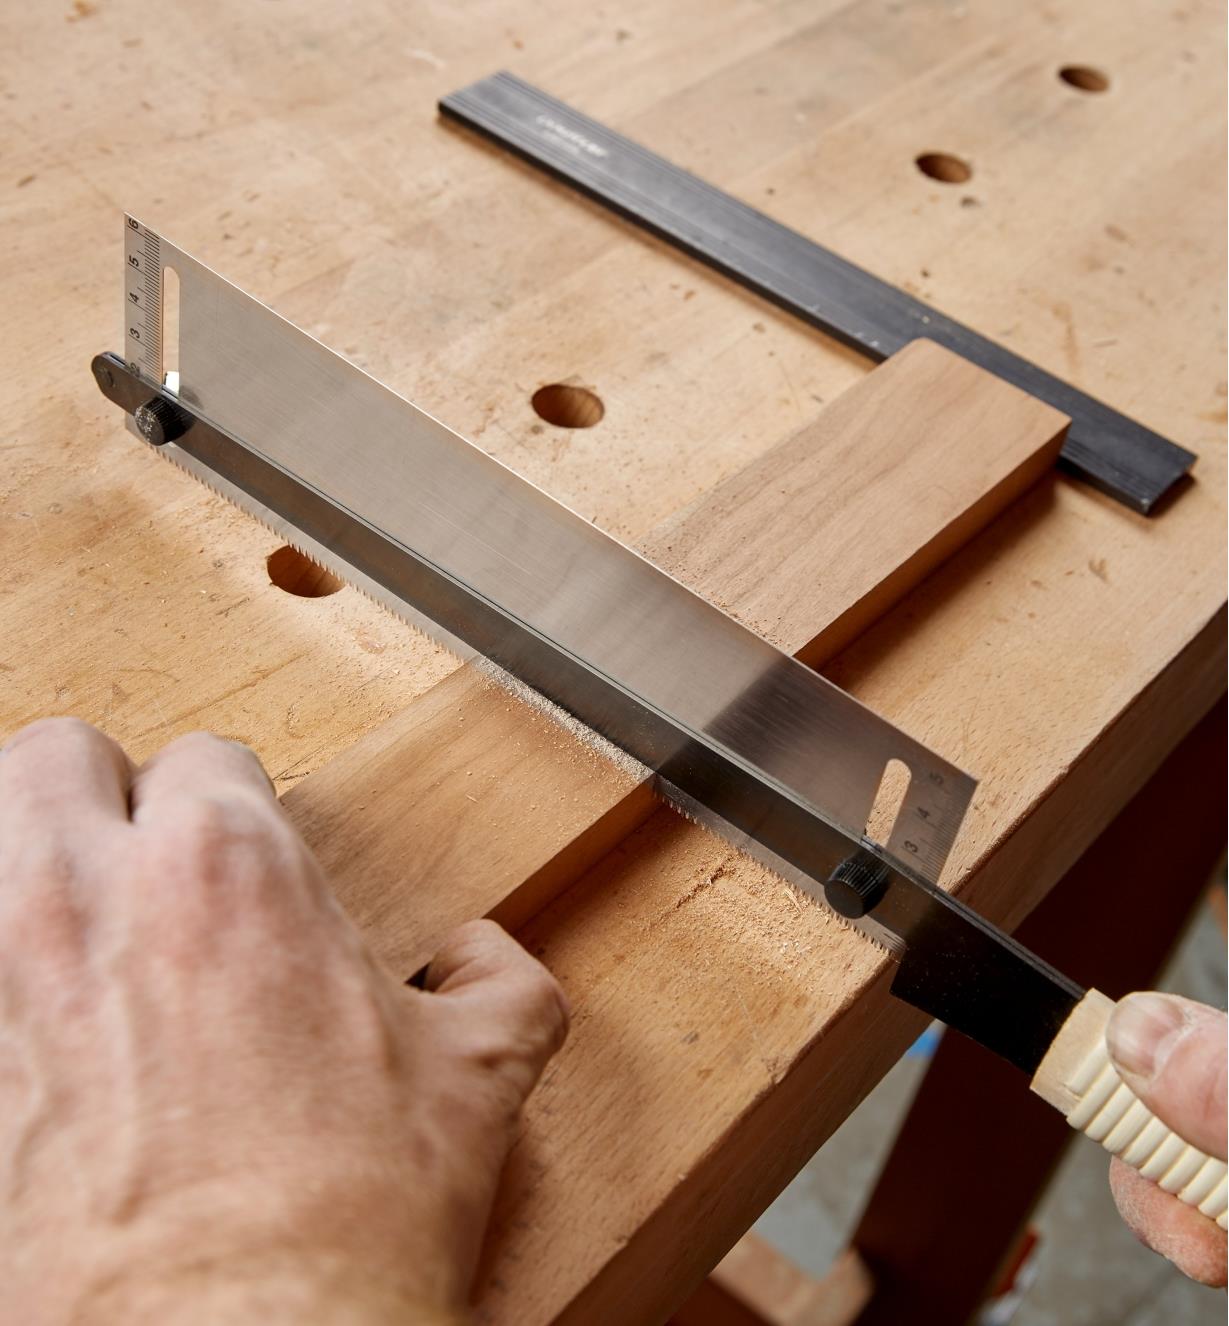 An adjustable-depth dozuki being used to make a cut in a thin piece of wood